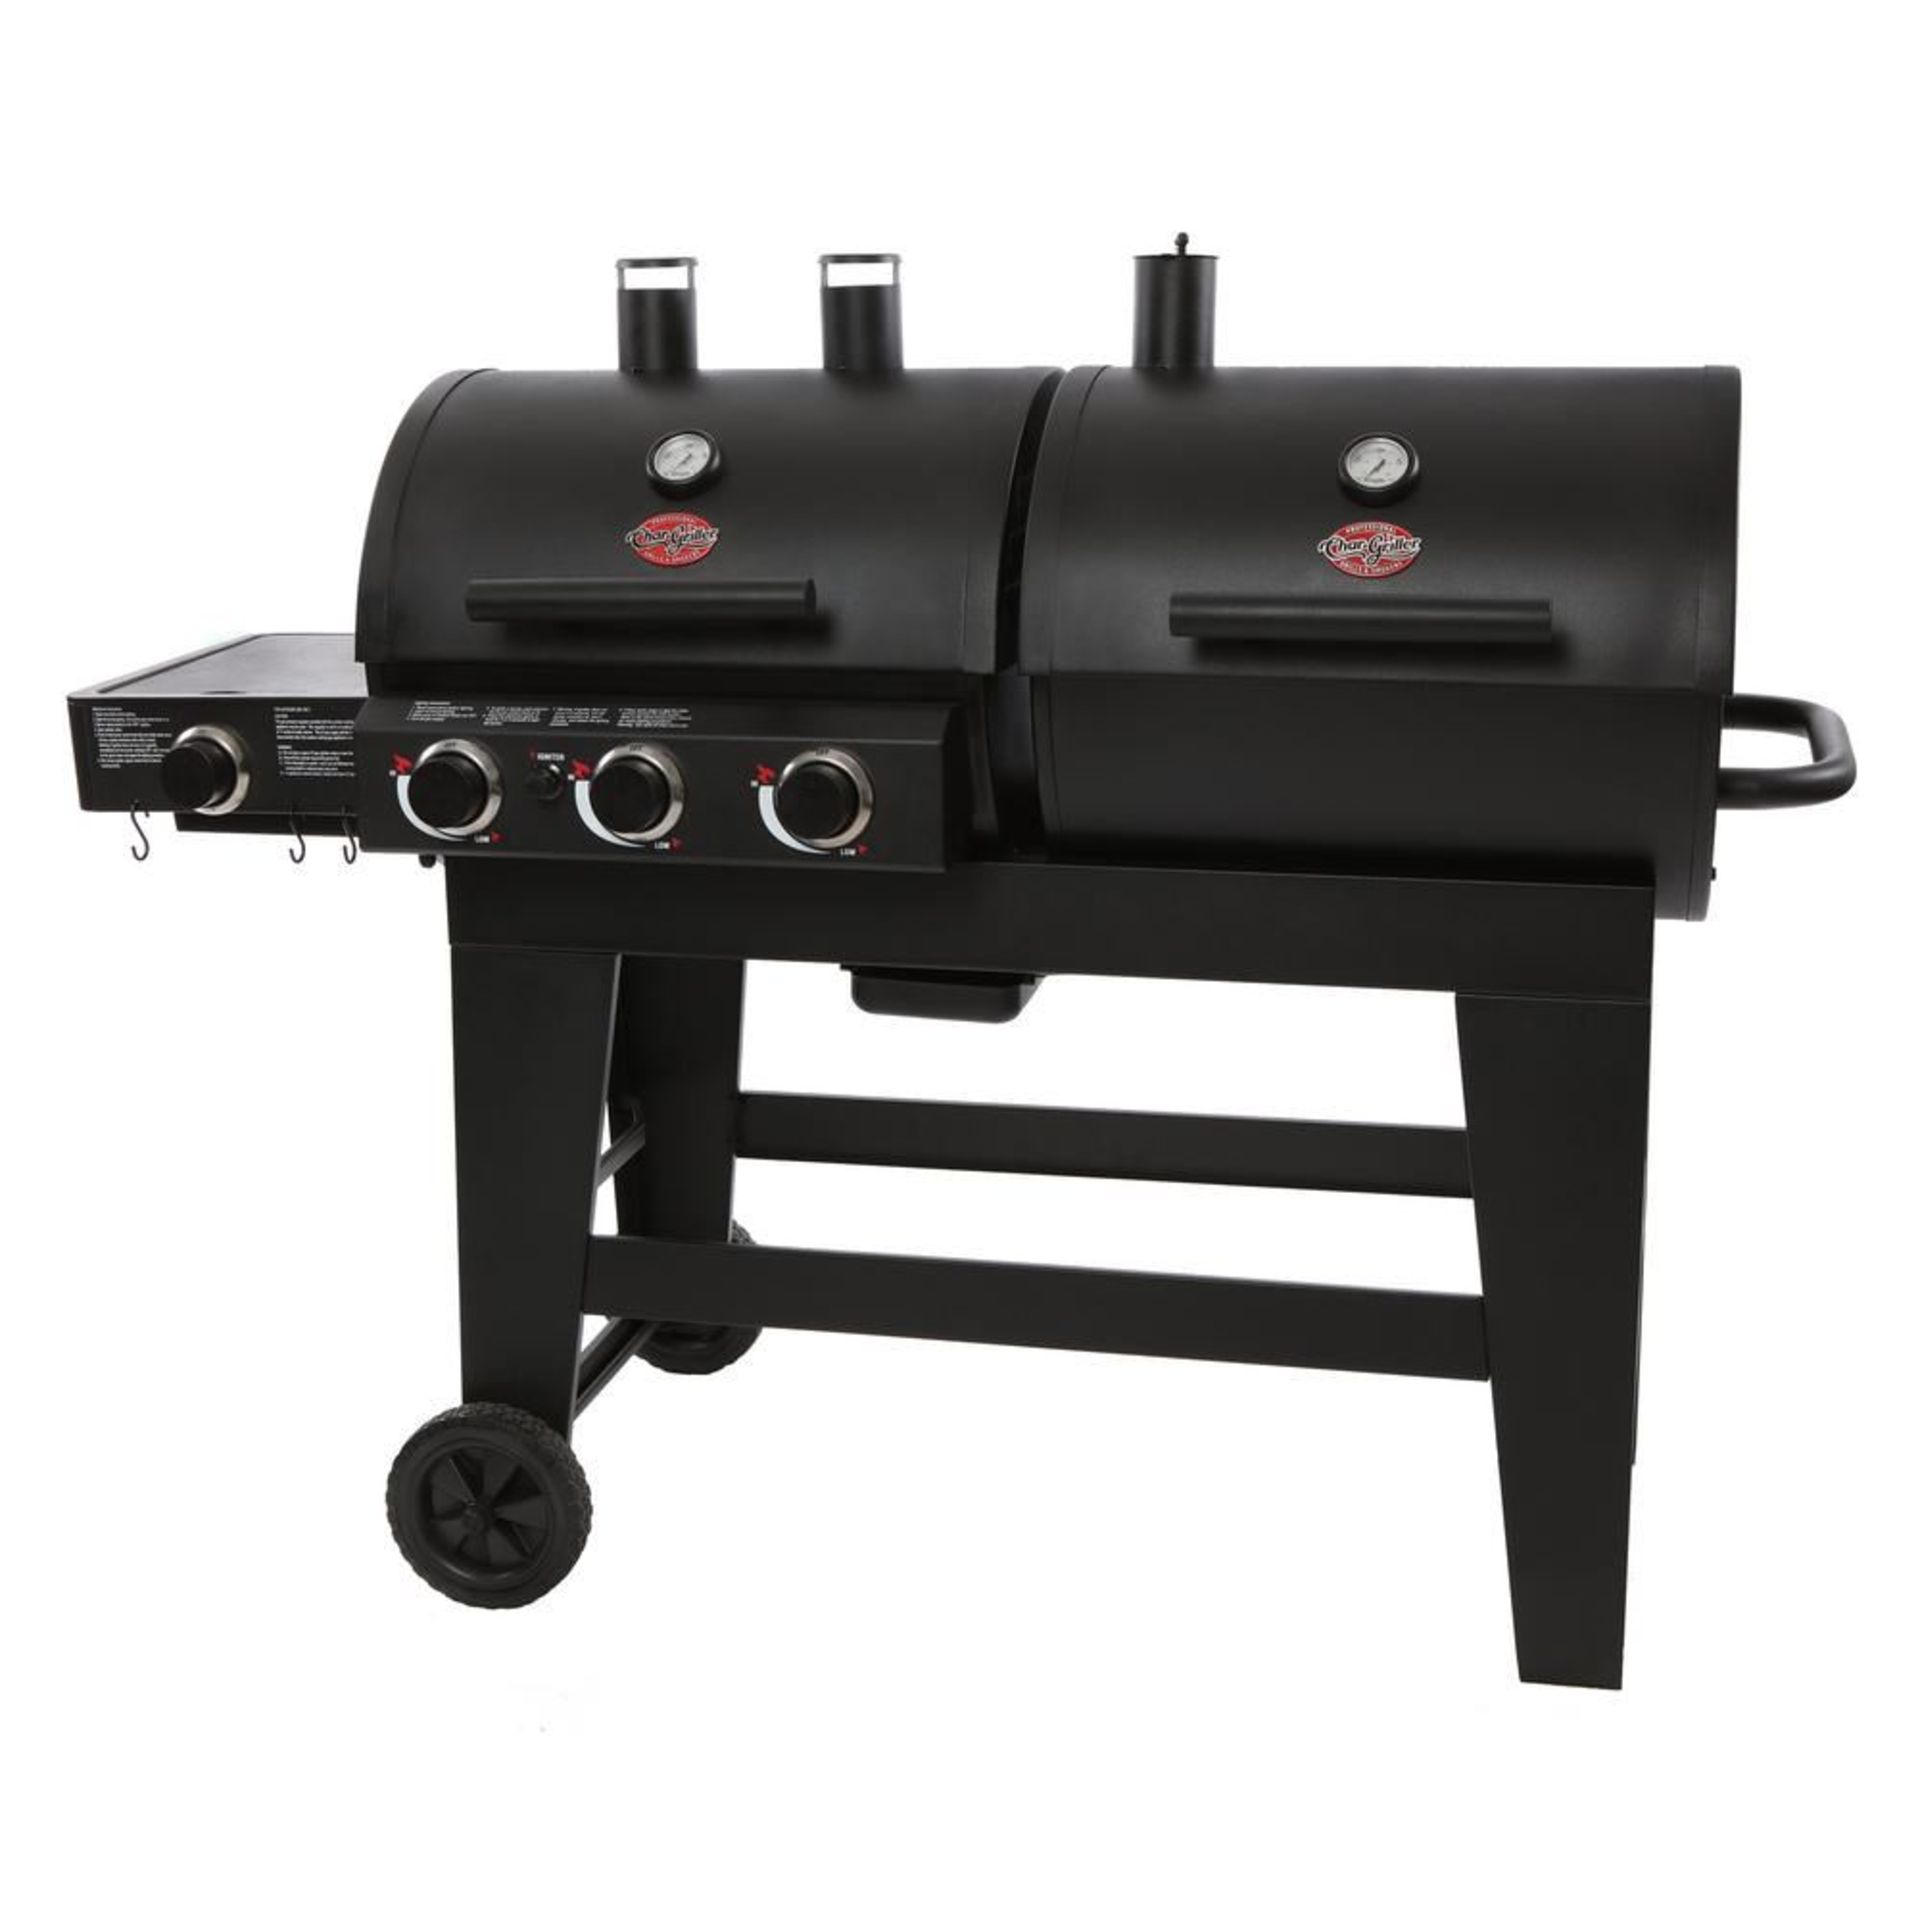 Char-Griller 3-Burner Gas and Charcoal Grill in Black